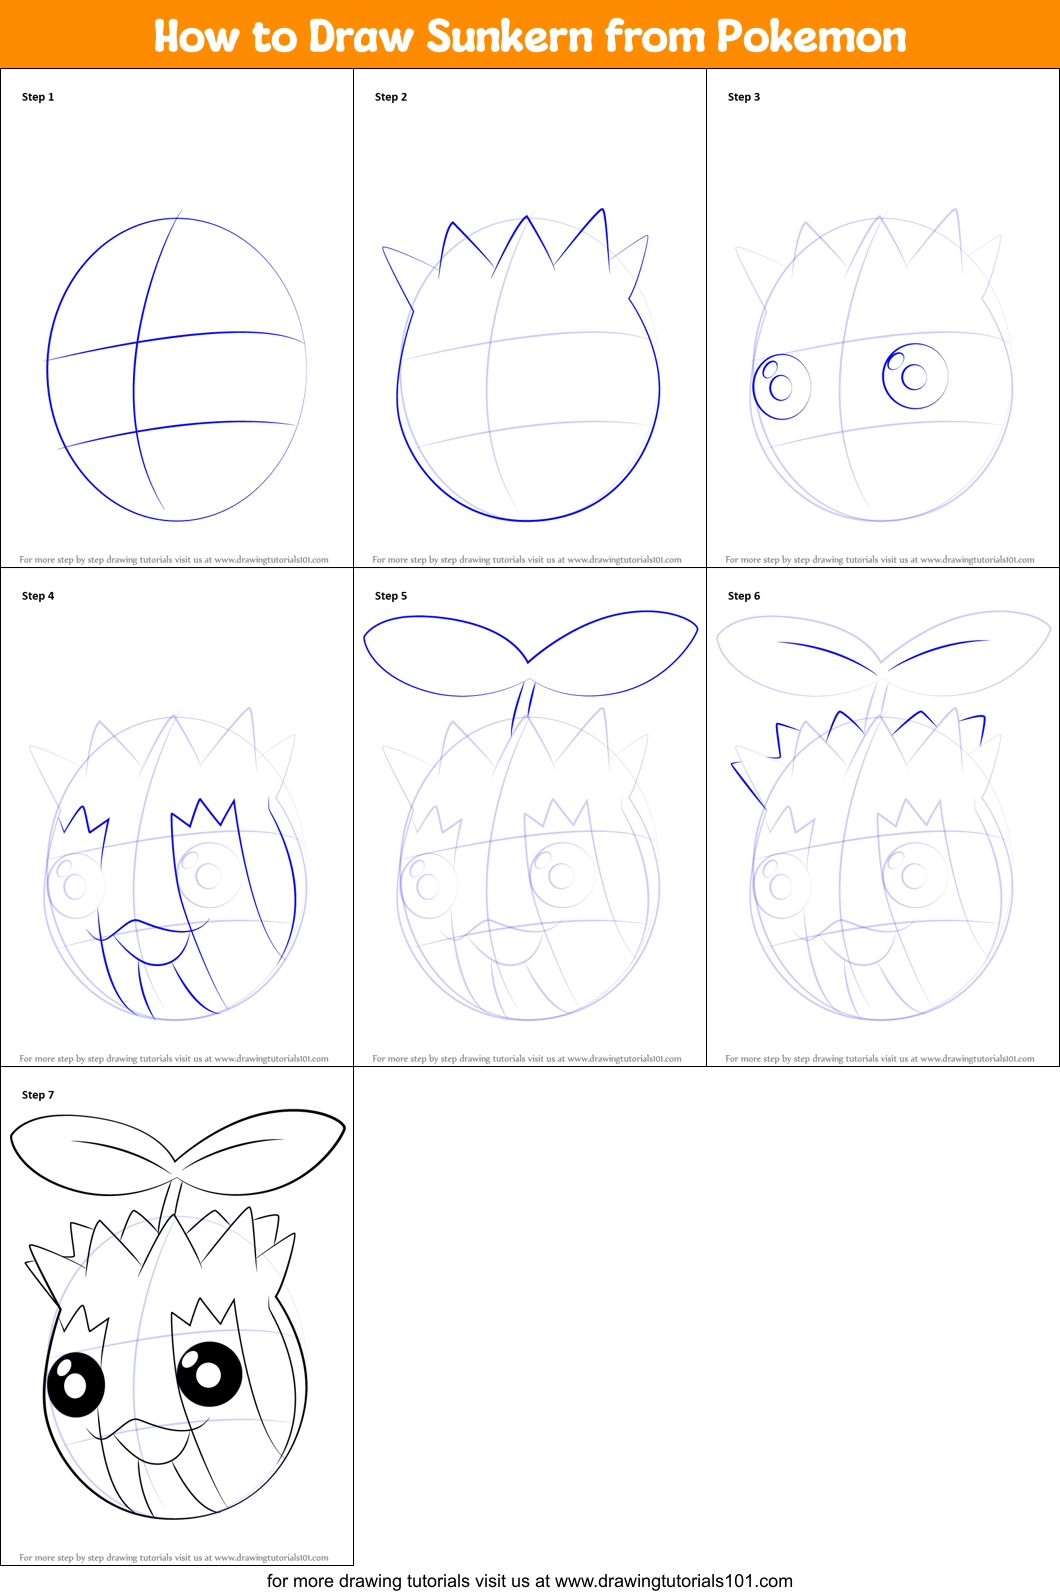 How to Draw Sunkern from Pokemon printable step by step drawing sheet